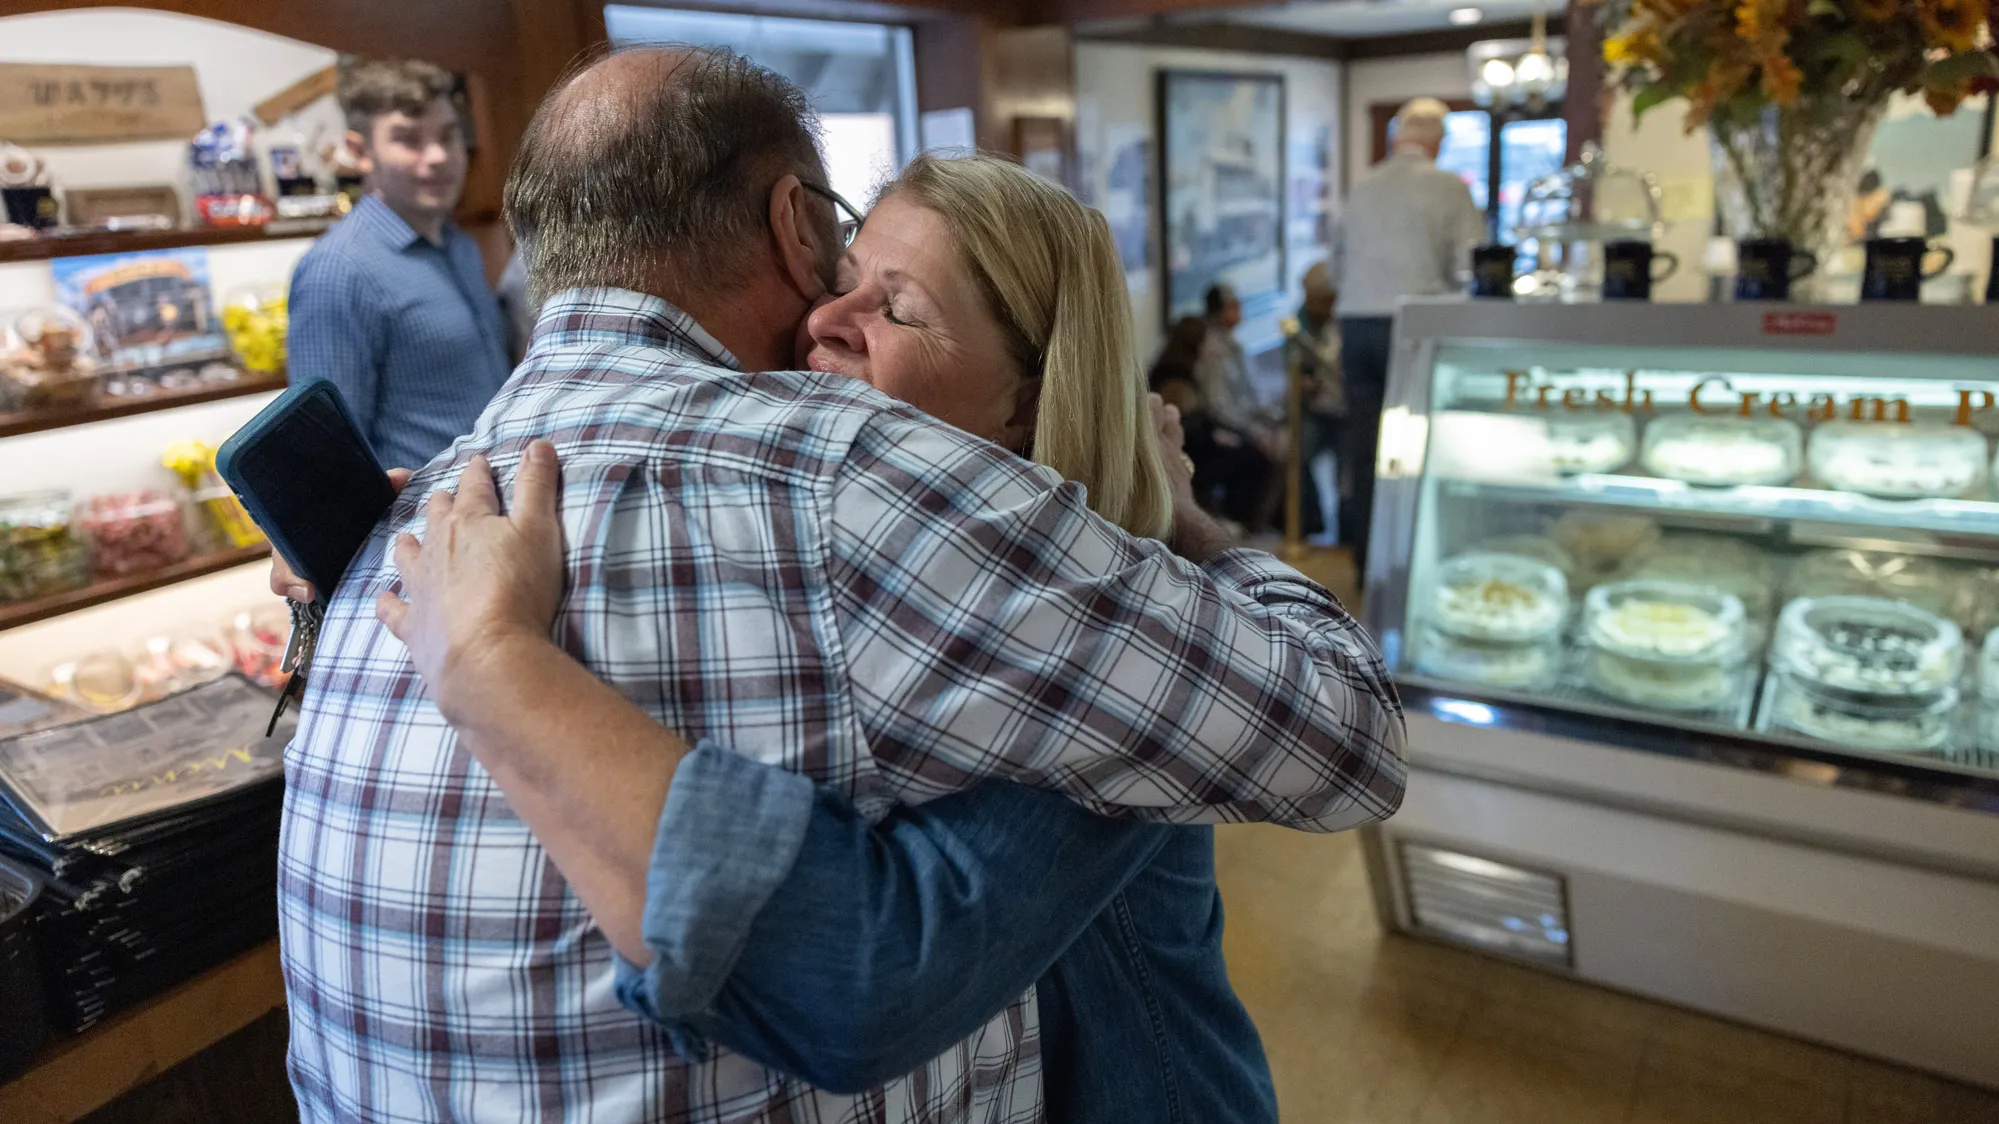 In a restaurant room (possibly an entry) lined with cases of pies and other food items for sale, a woman in a denim shirt hugs a man wearing a plaid shirt. 